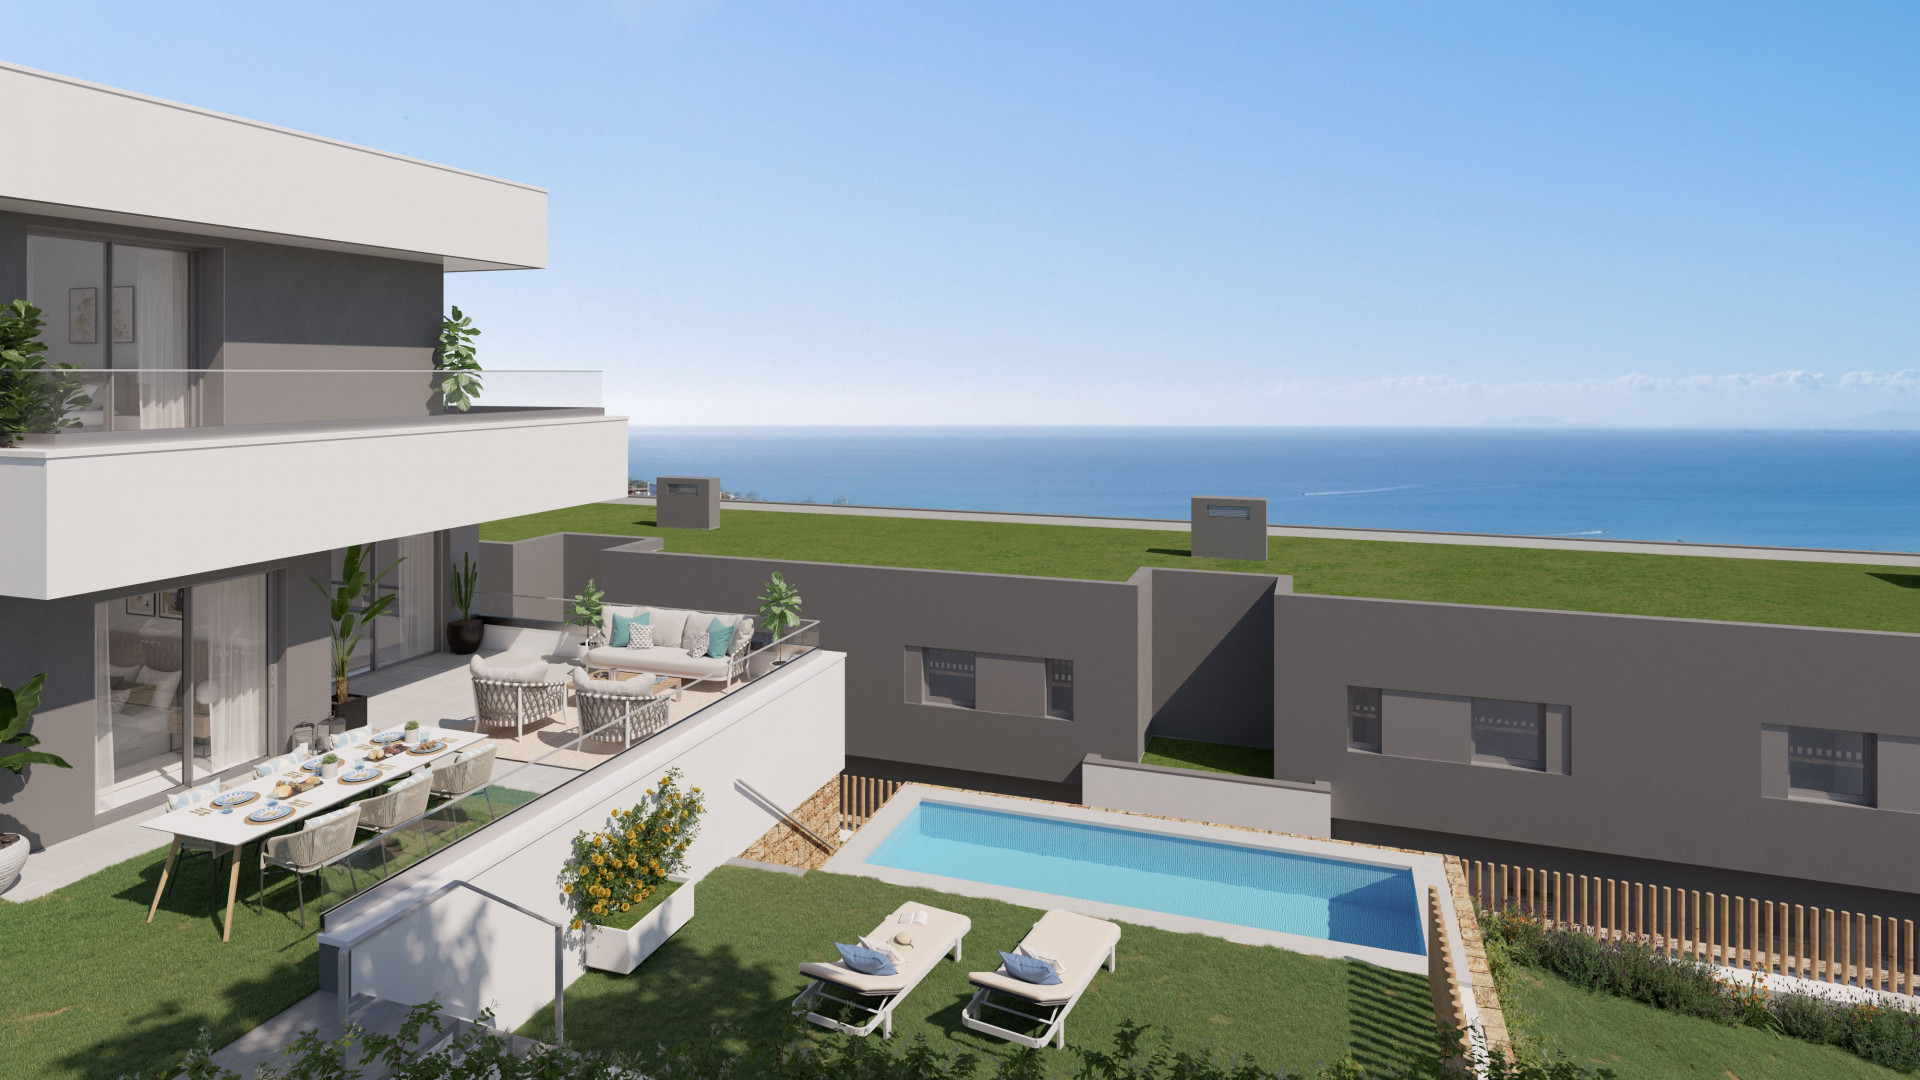 Blue Marine: Residential project in Manilva of semi-detached and detached houses with 3 and 4 bedrooms. | Image 0